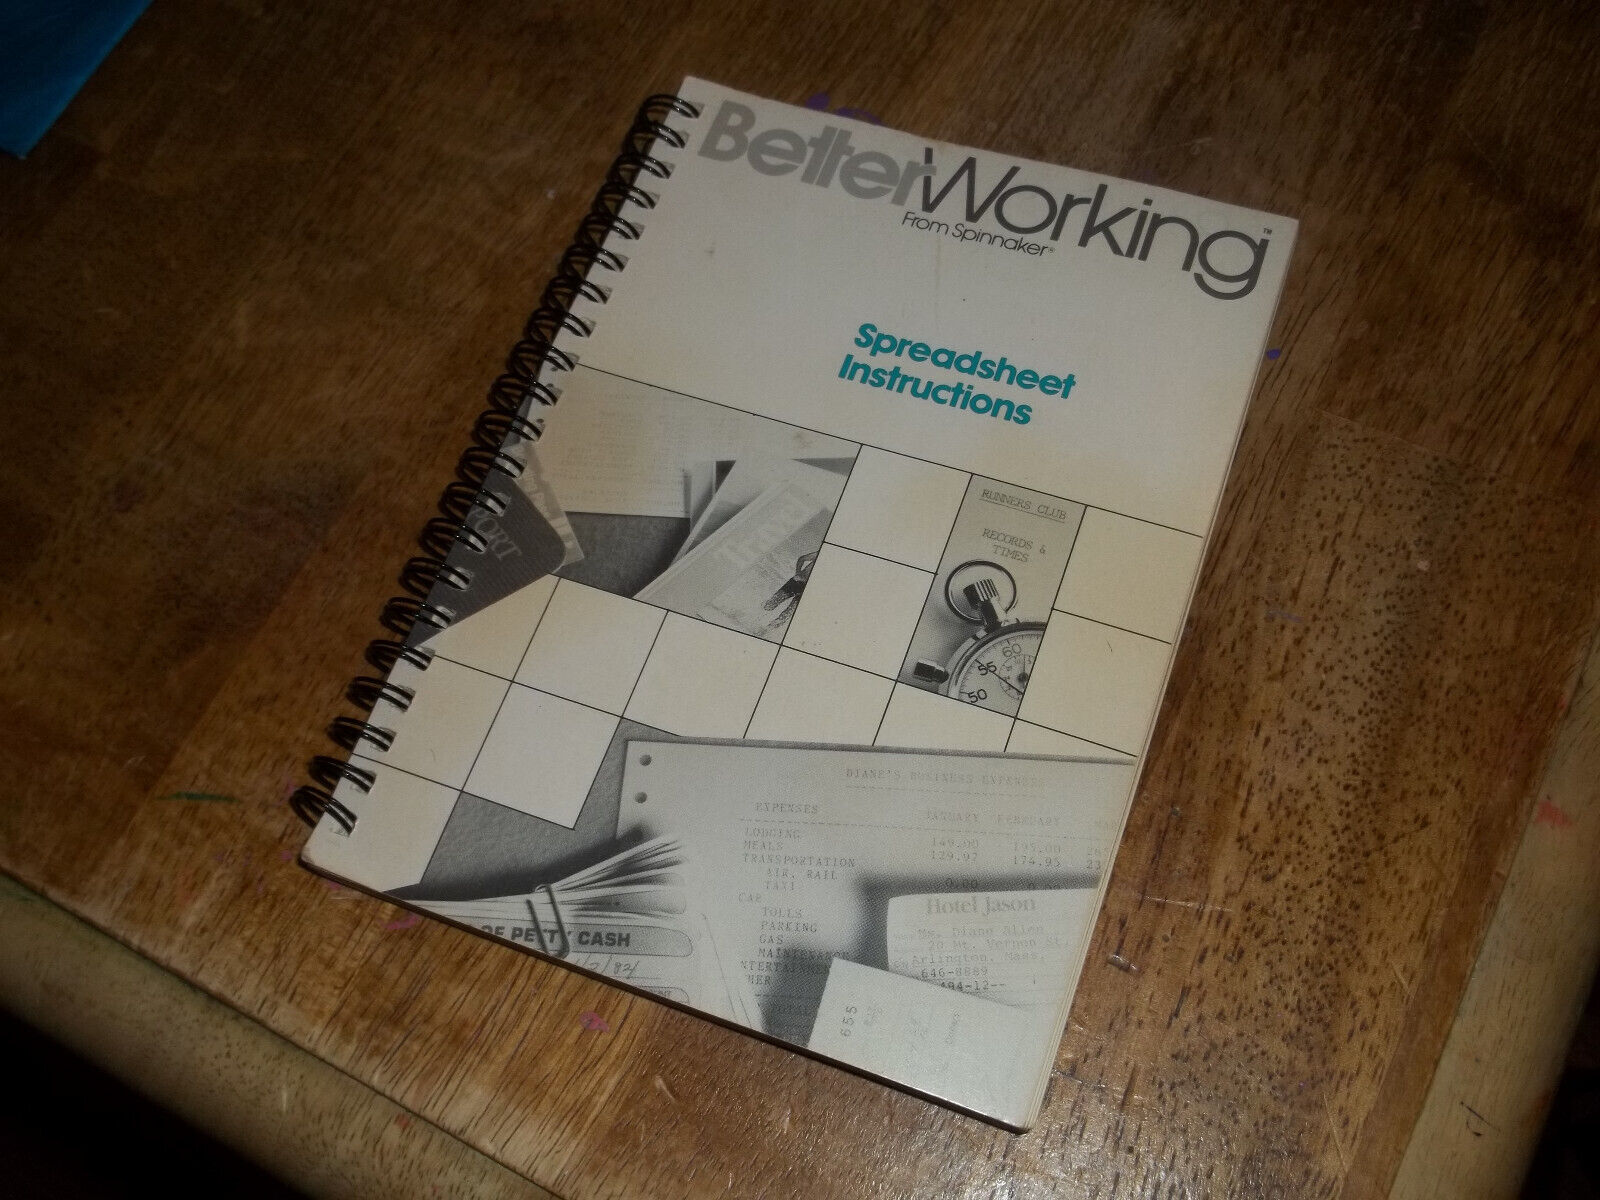 Commodore 64/128 - Better Working Spreads From Spinnaker * VTG 1986